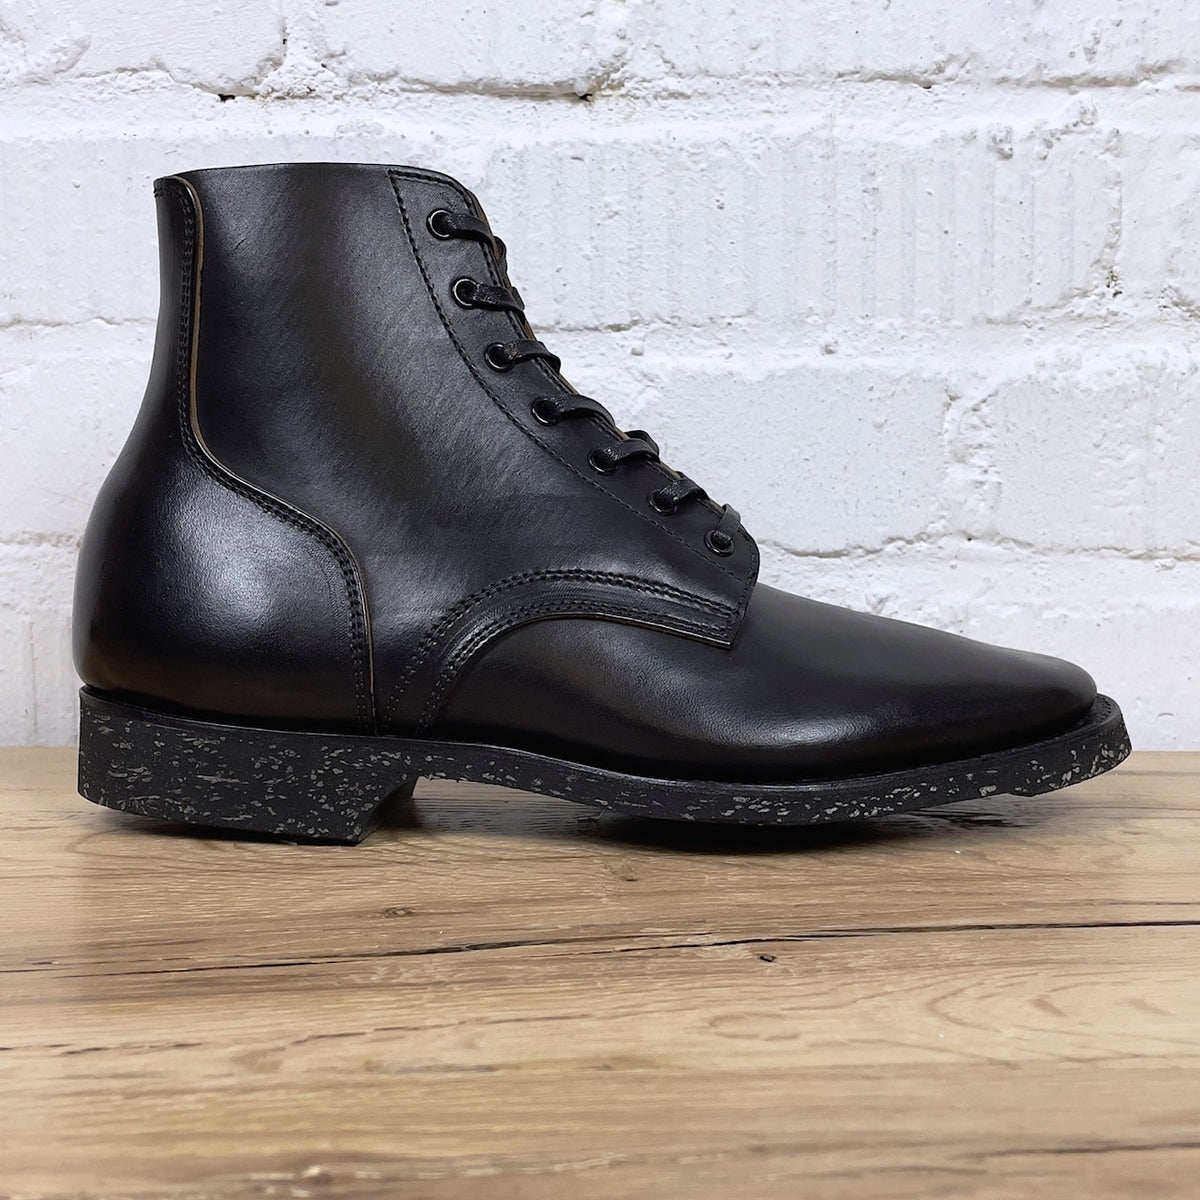 【NEW定番】CLINCH Yeager boots - Horsebutt - 靴